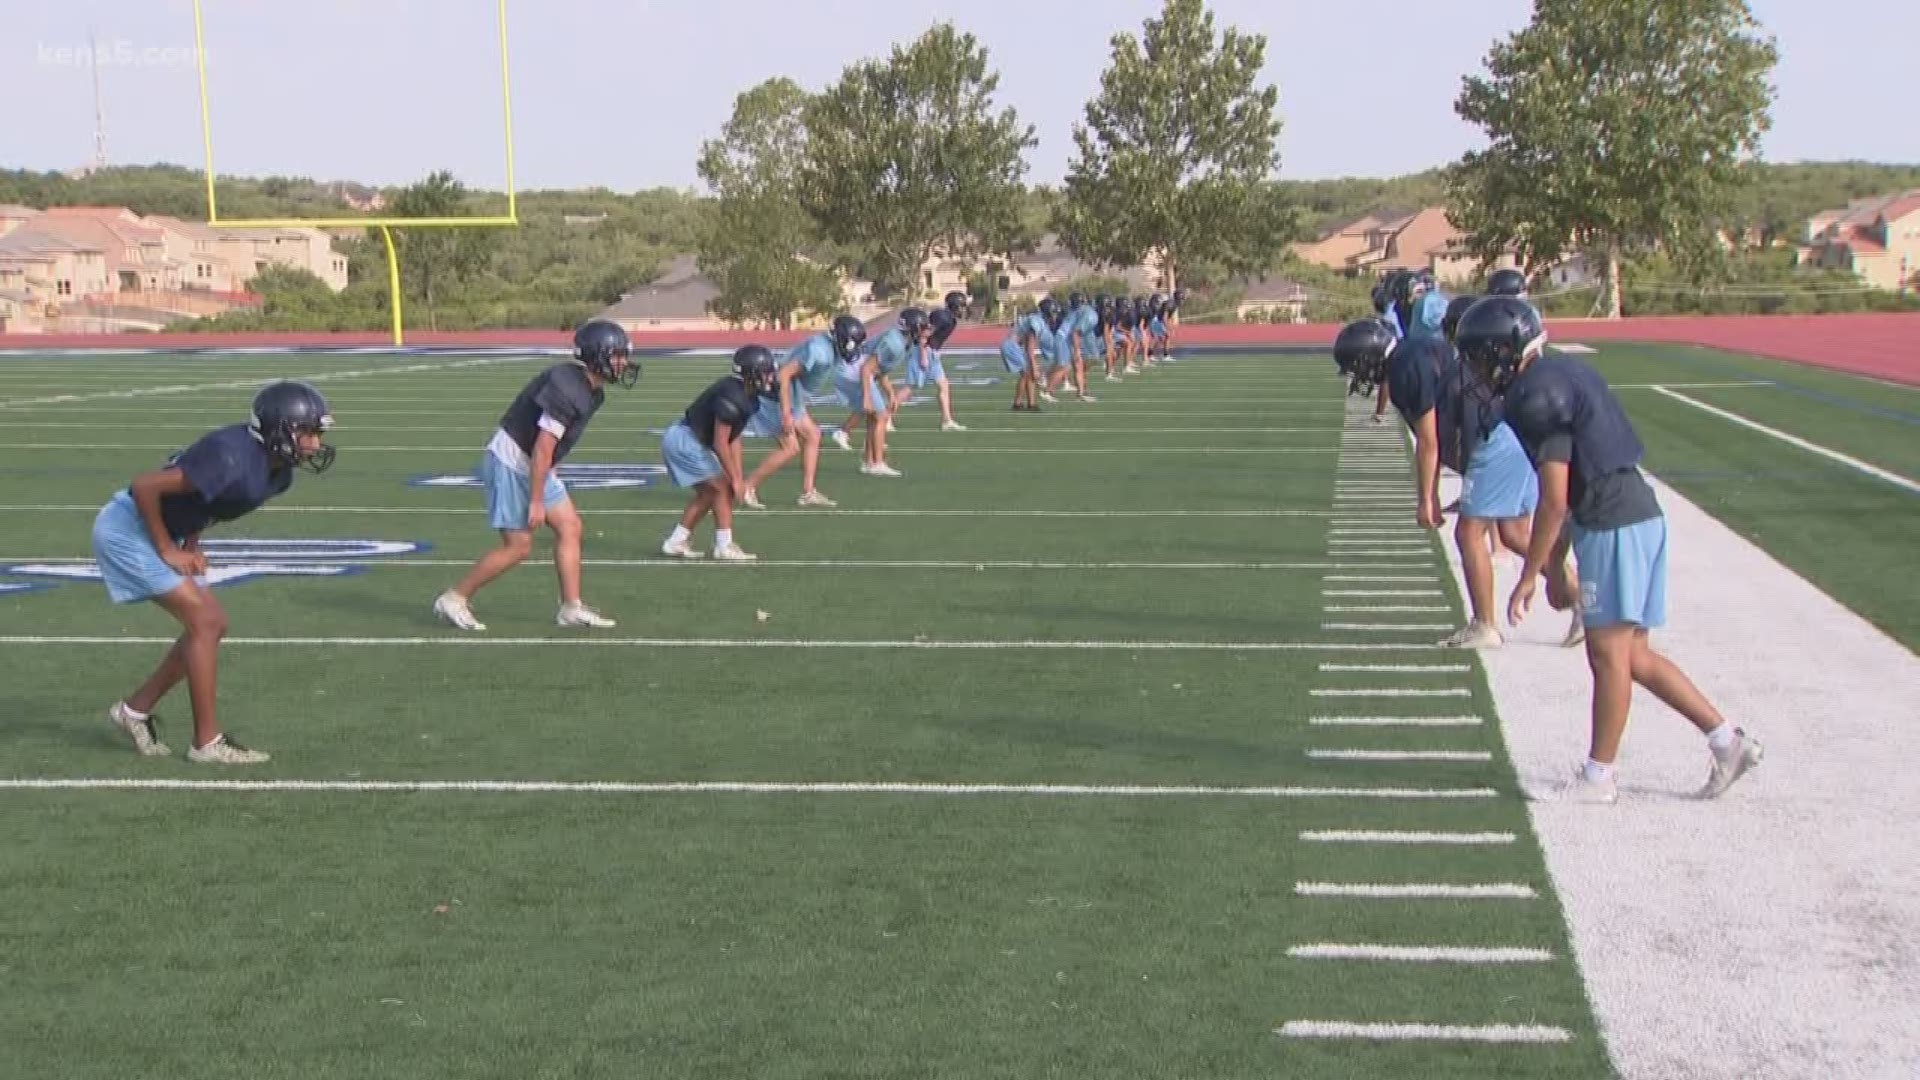 The Jaguars' offensive skill players look great on paper, but they'll need their offensive line to have their 'A' game from the start in the opener against Brandeis.